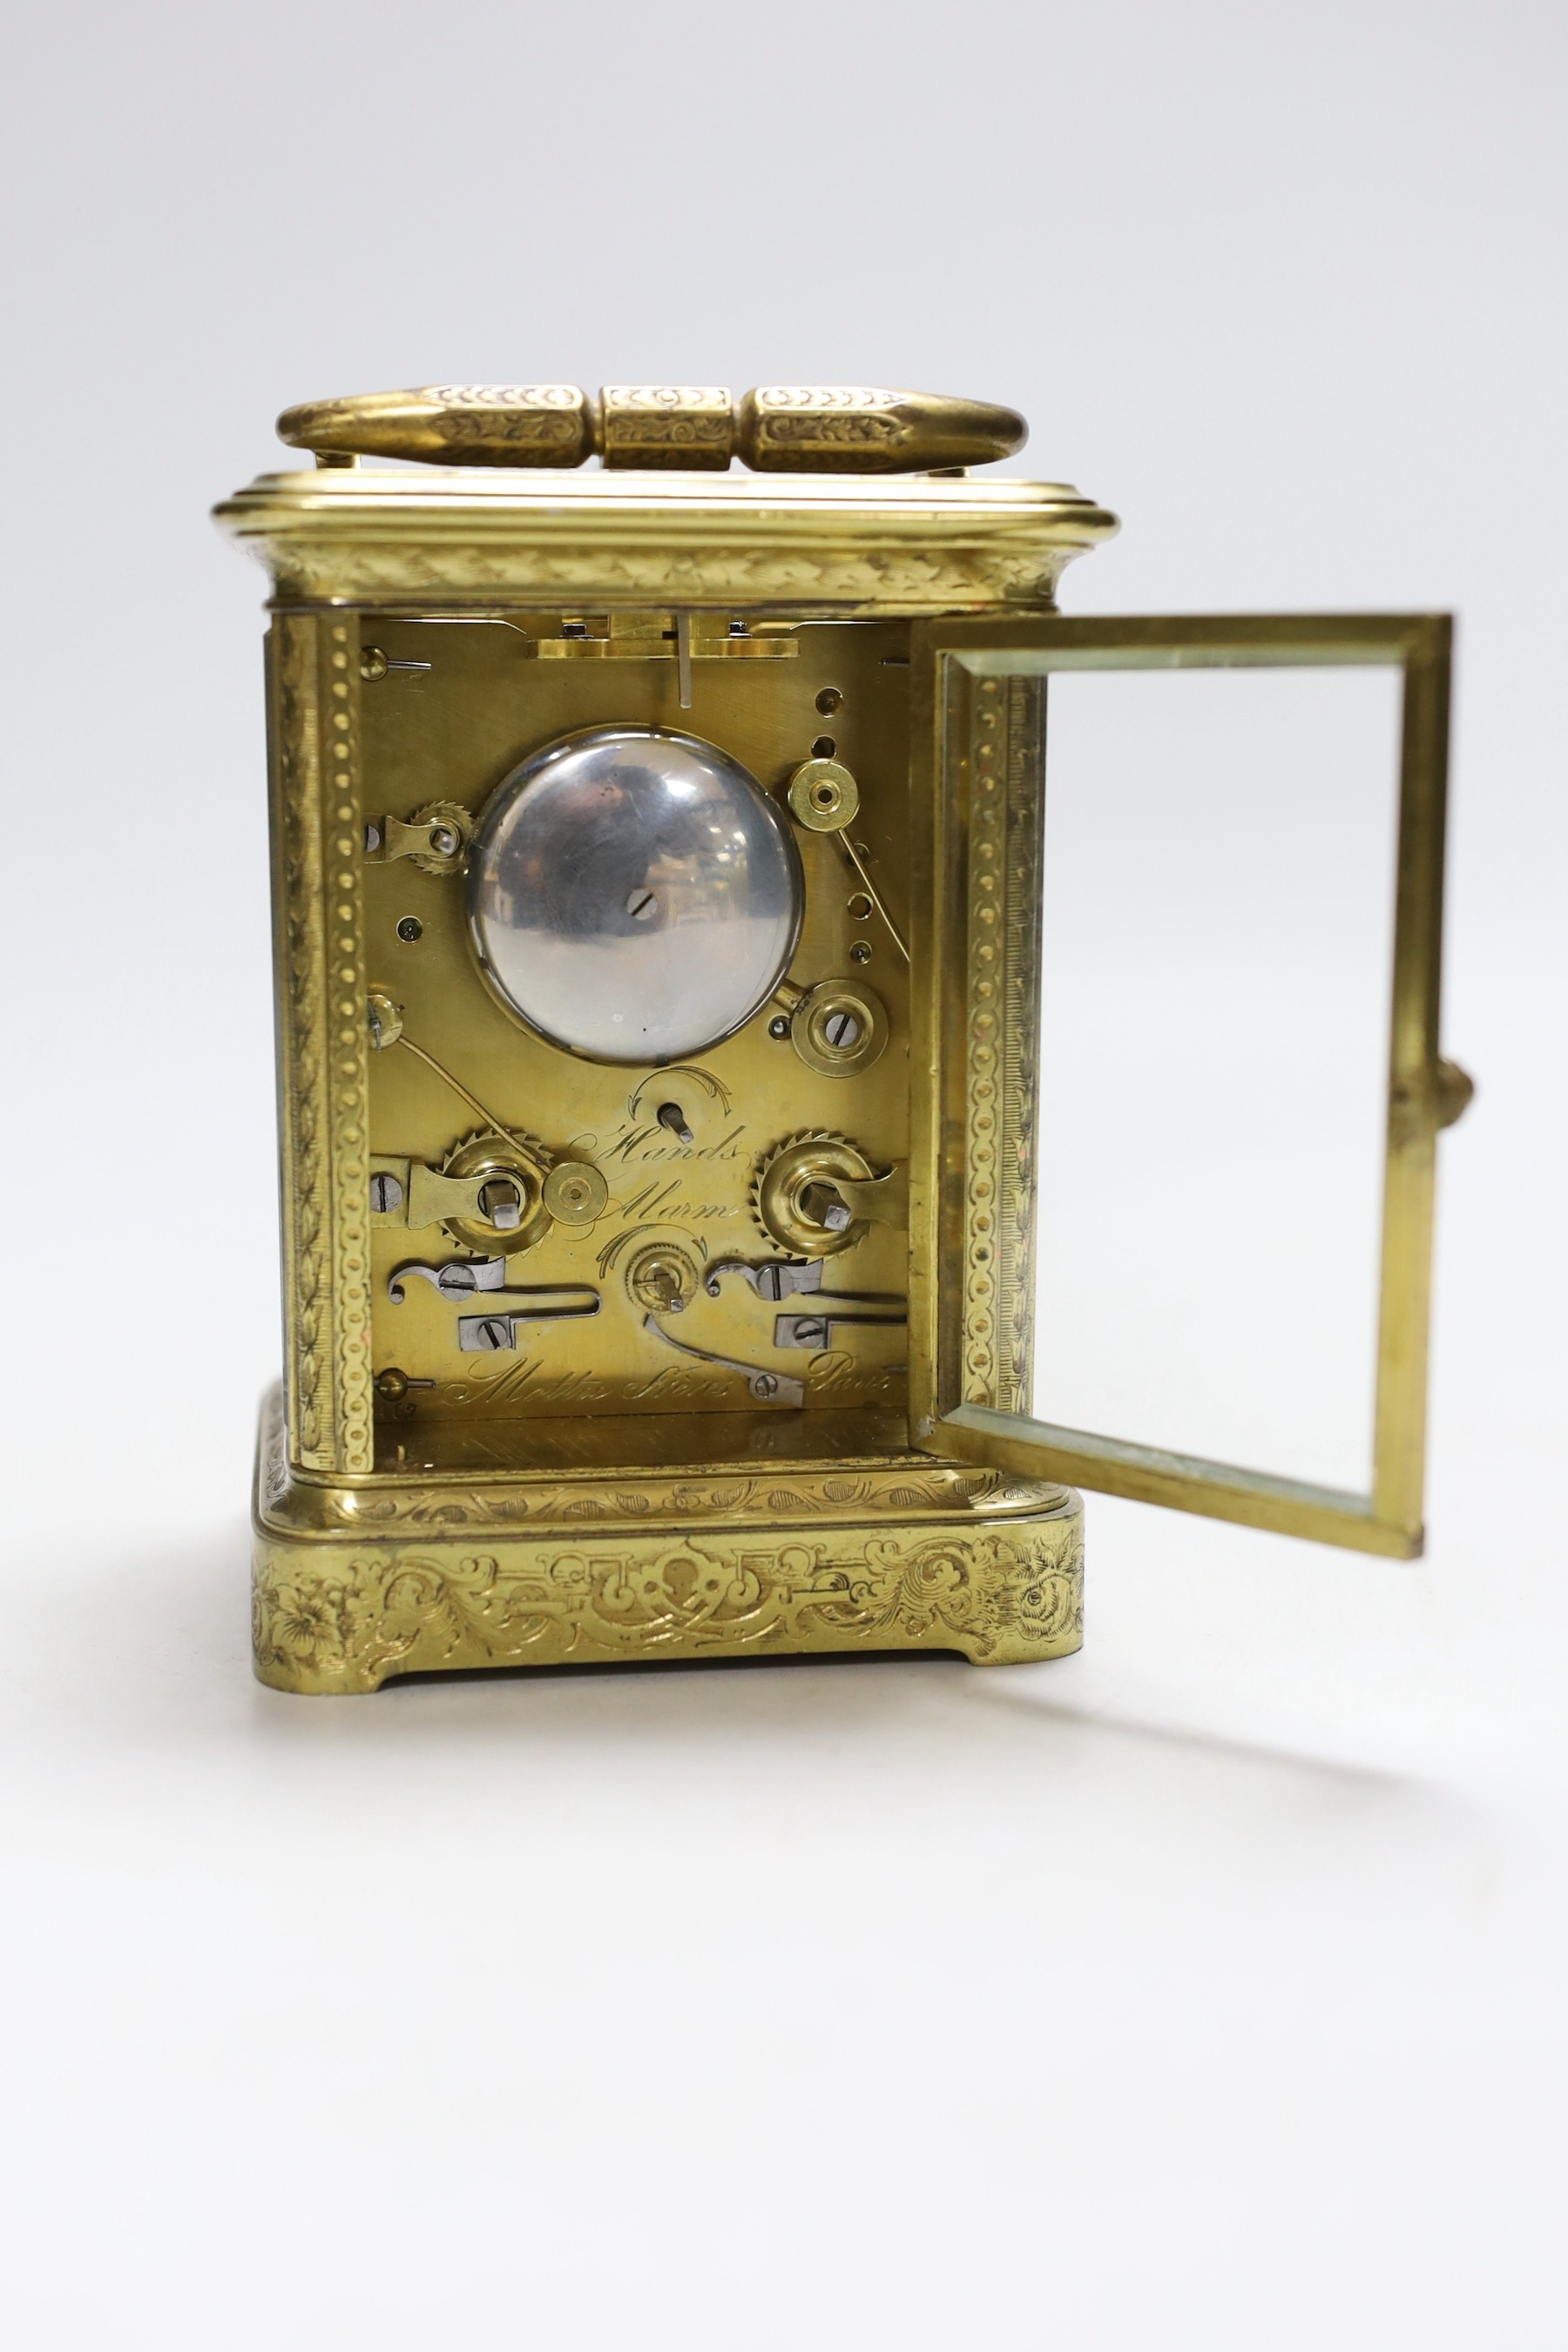 A late 19th century French engraved brass repeating carriage clock with alarm, signed Mottu Freres, Paris, 13cm high